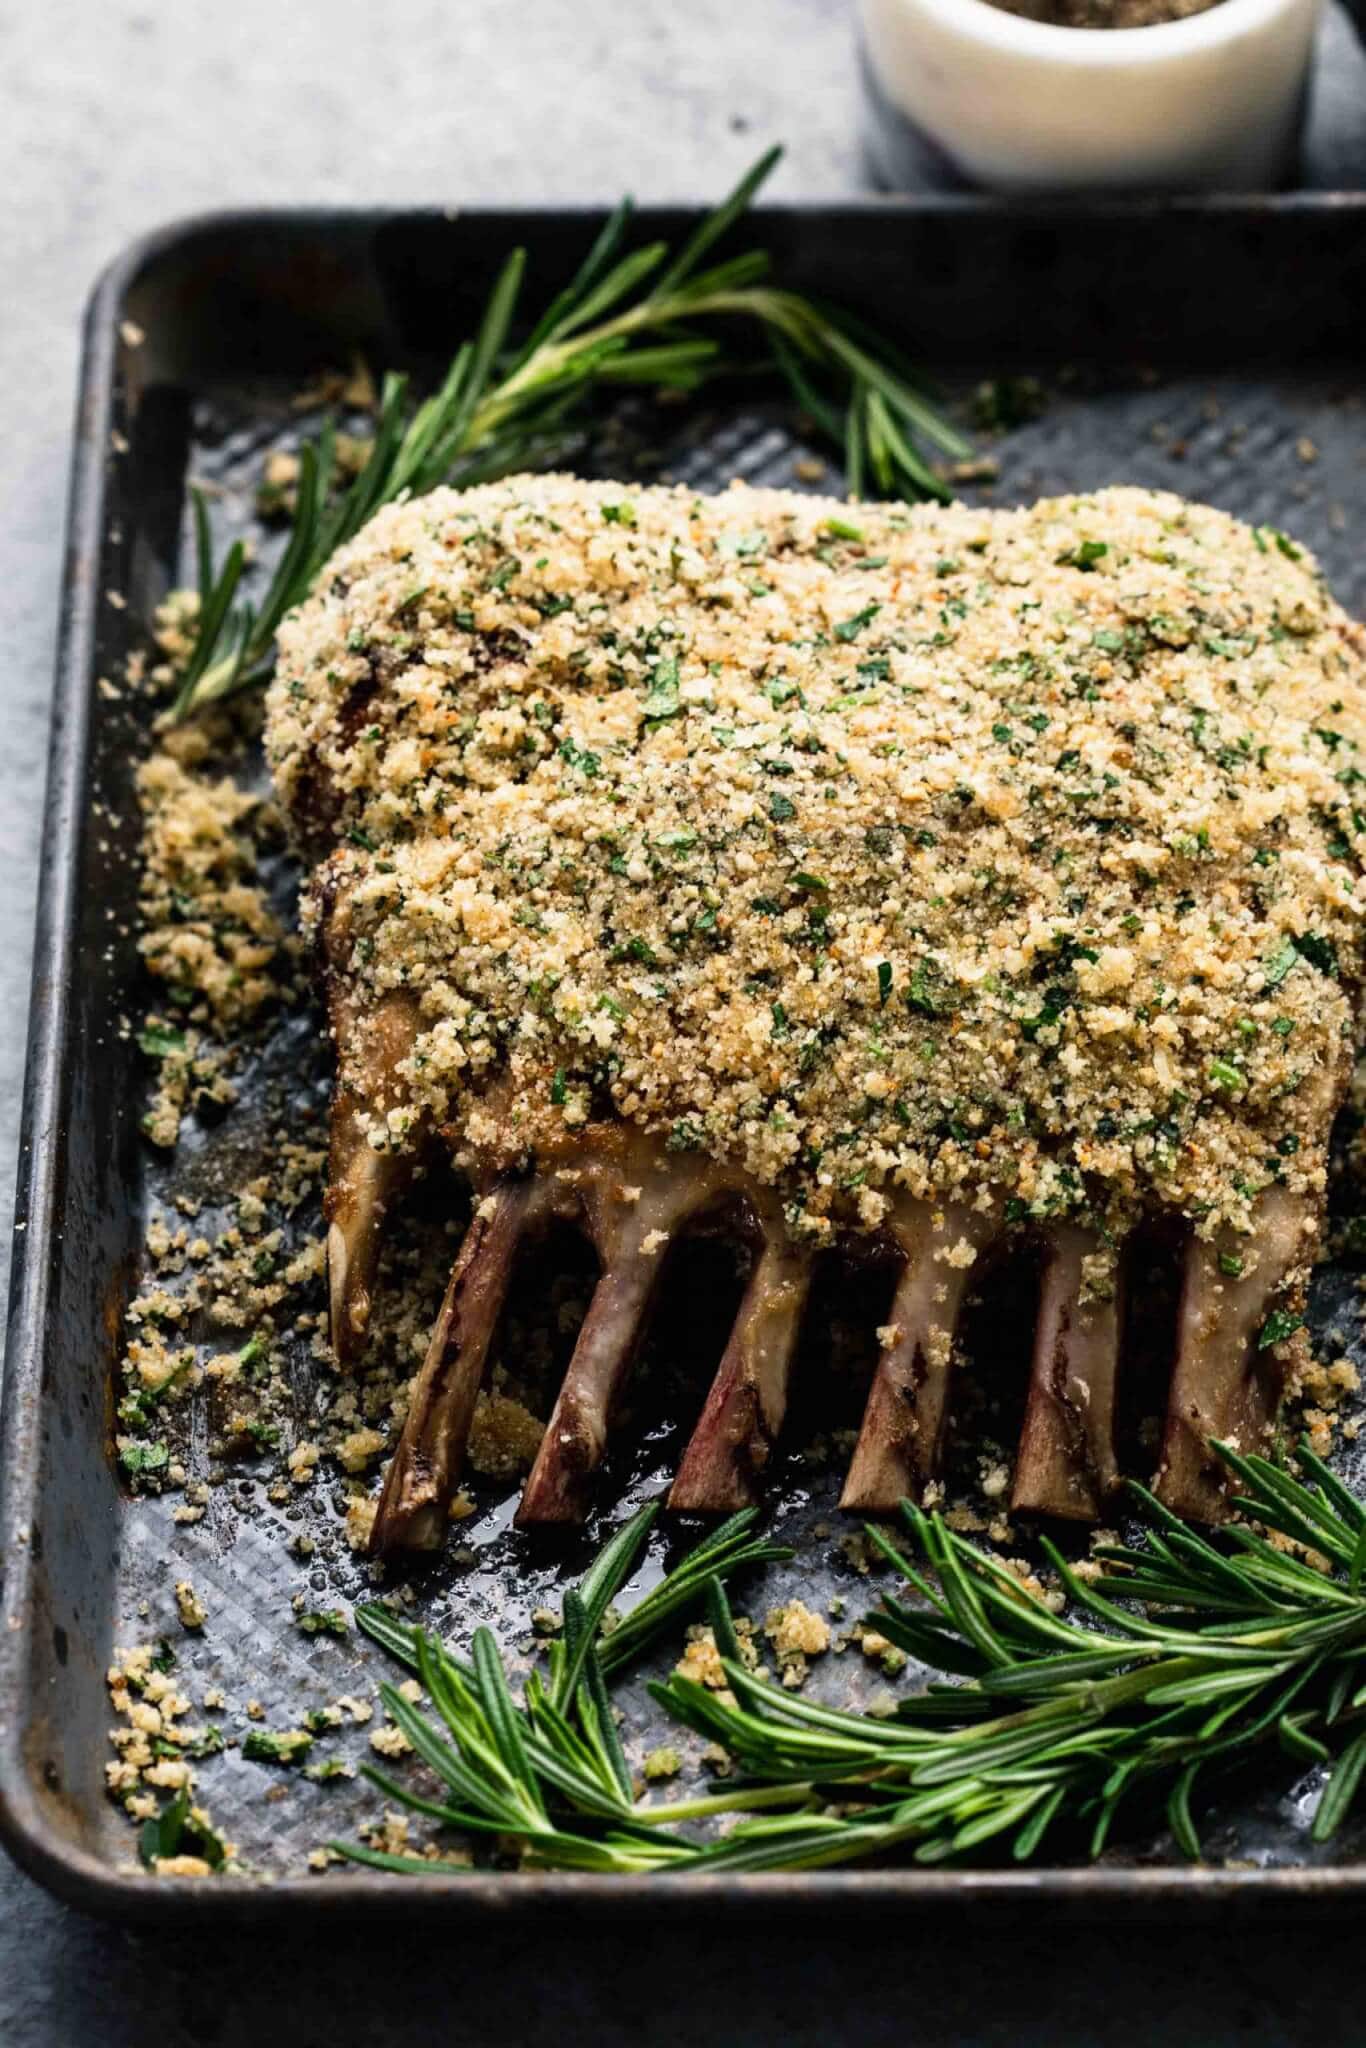 Rack of lamb coated with breadcrumbs before baking in oven.